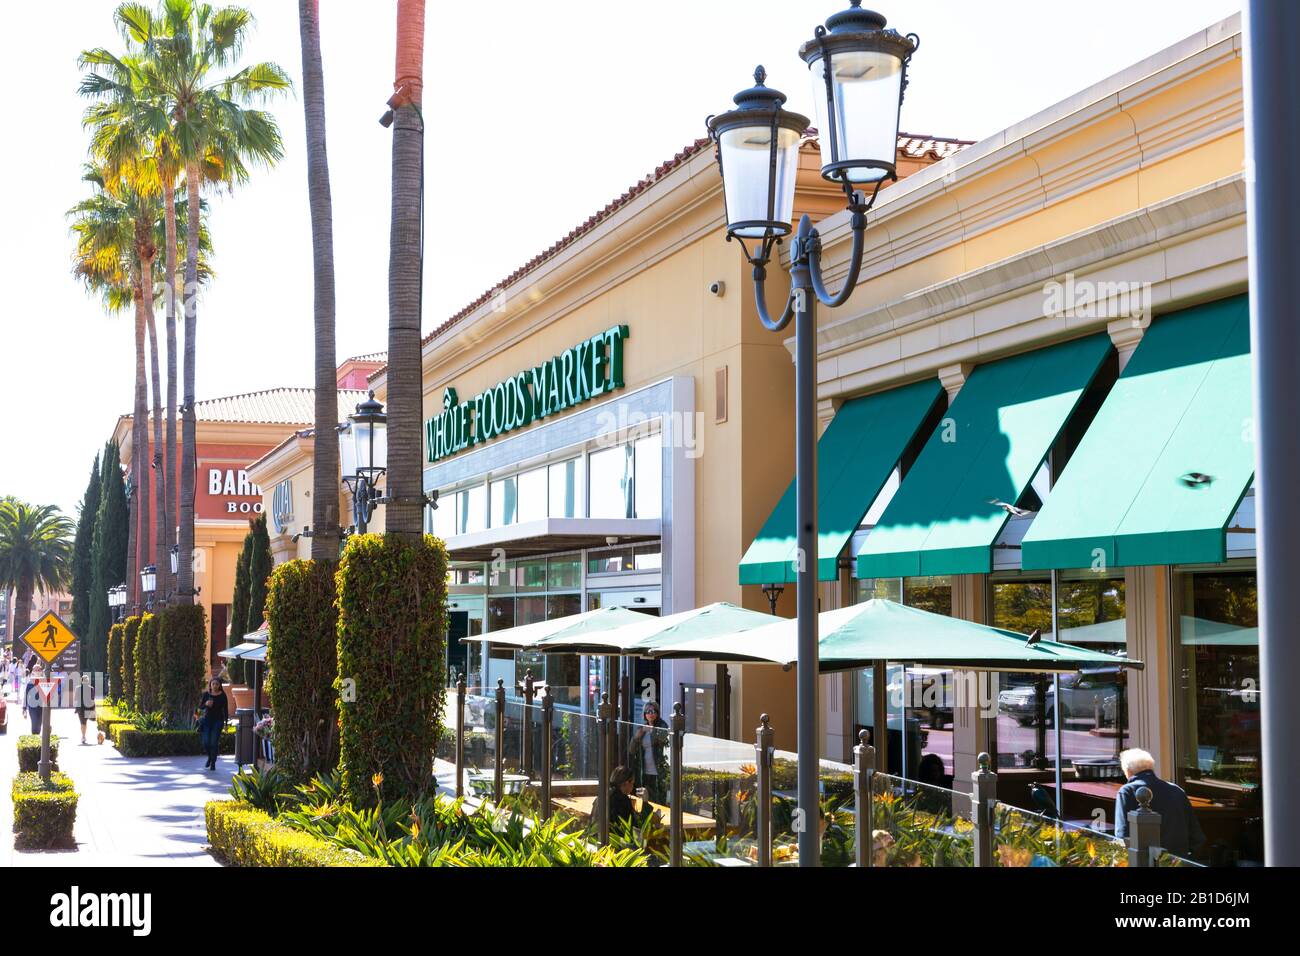 The Wholefoods Market in Fashion Island has palm trees, green awnings, and decorative lamps at the storefront.  Newport Beach, California. Stock Photo